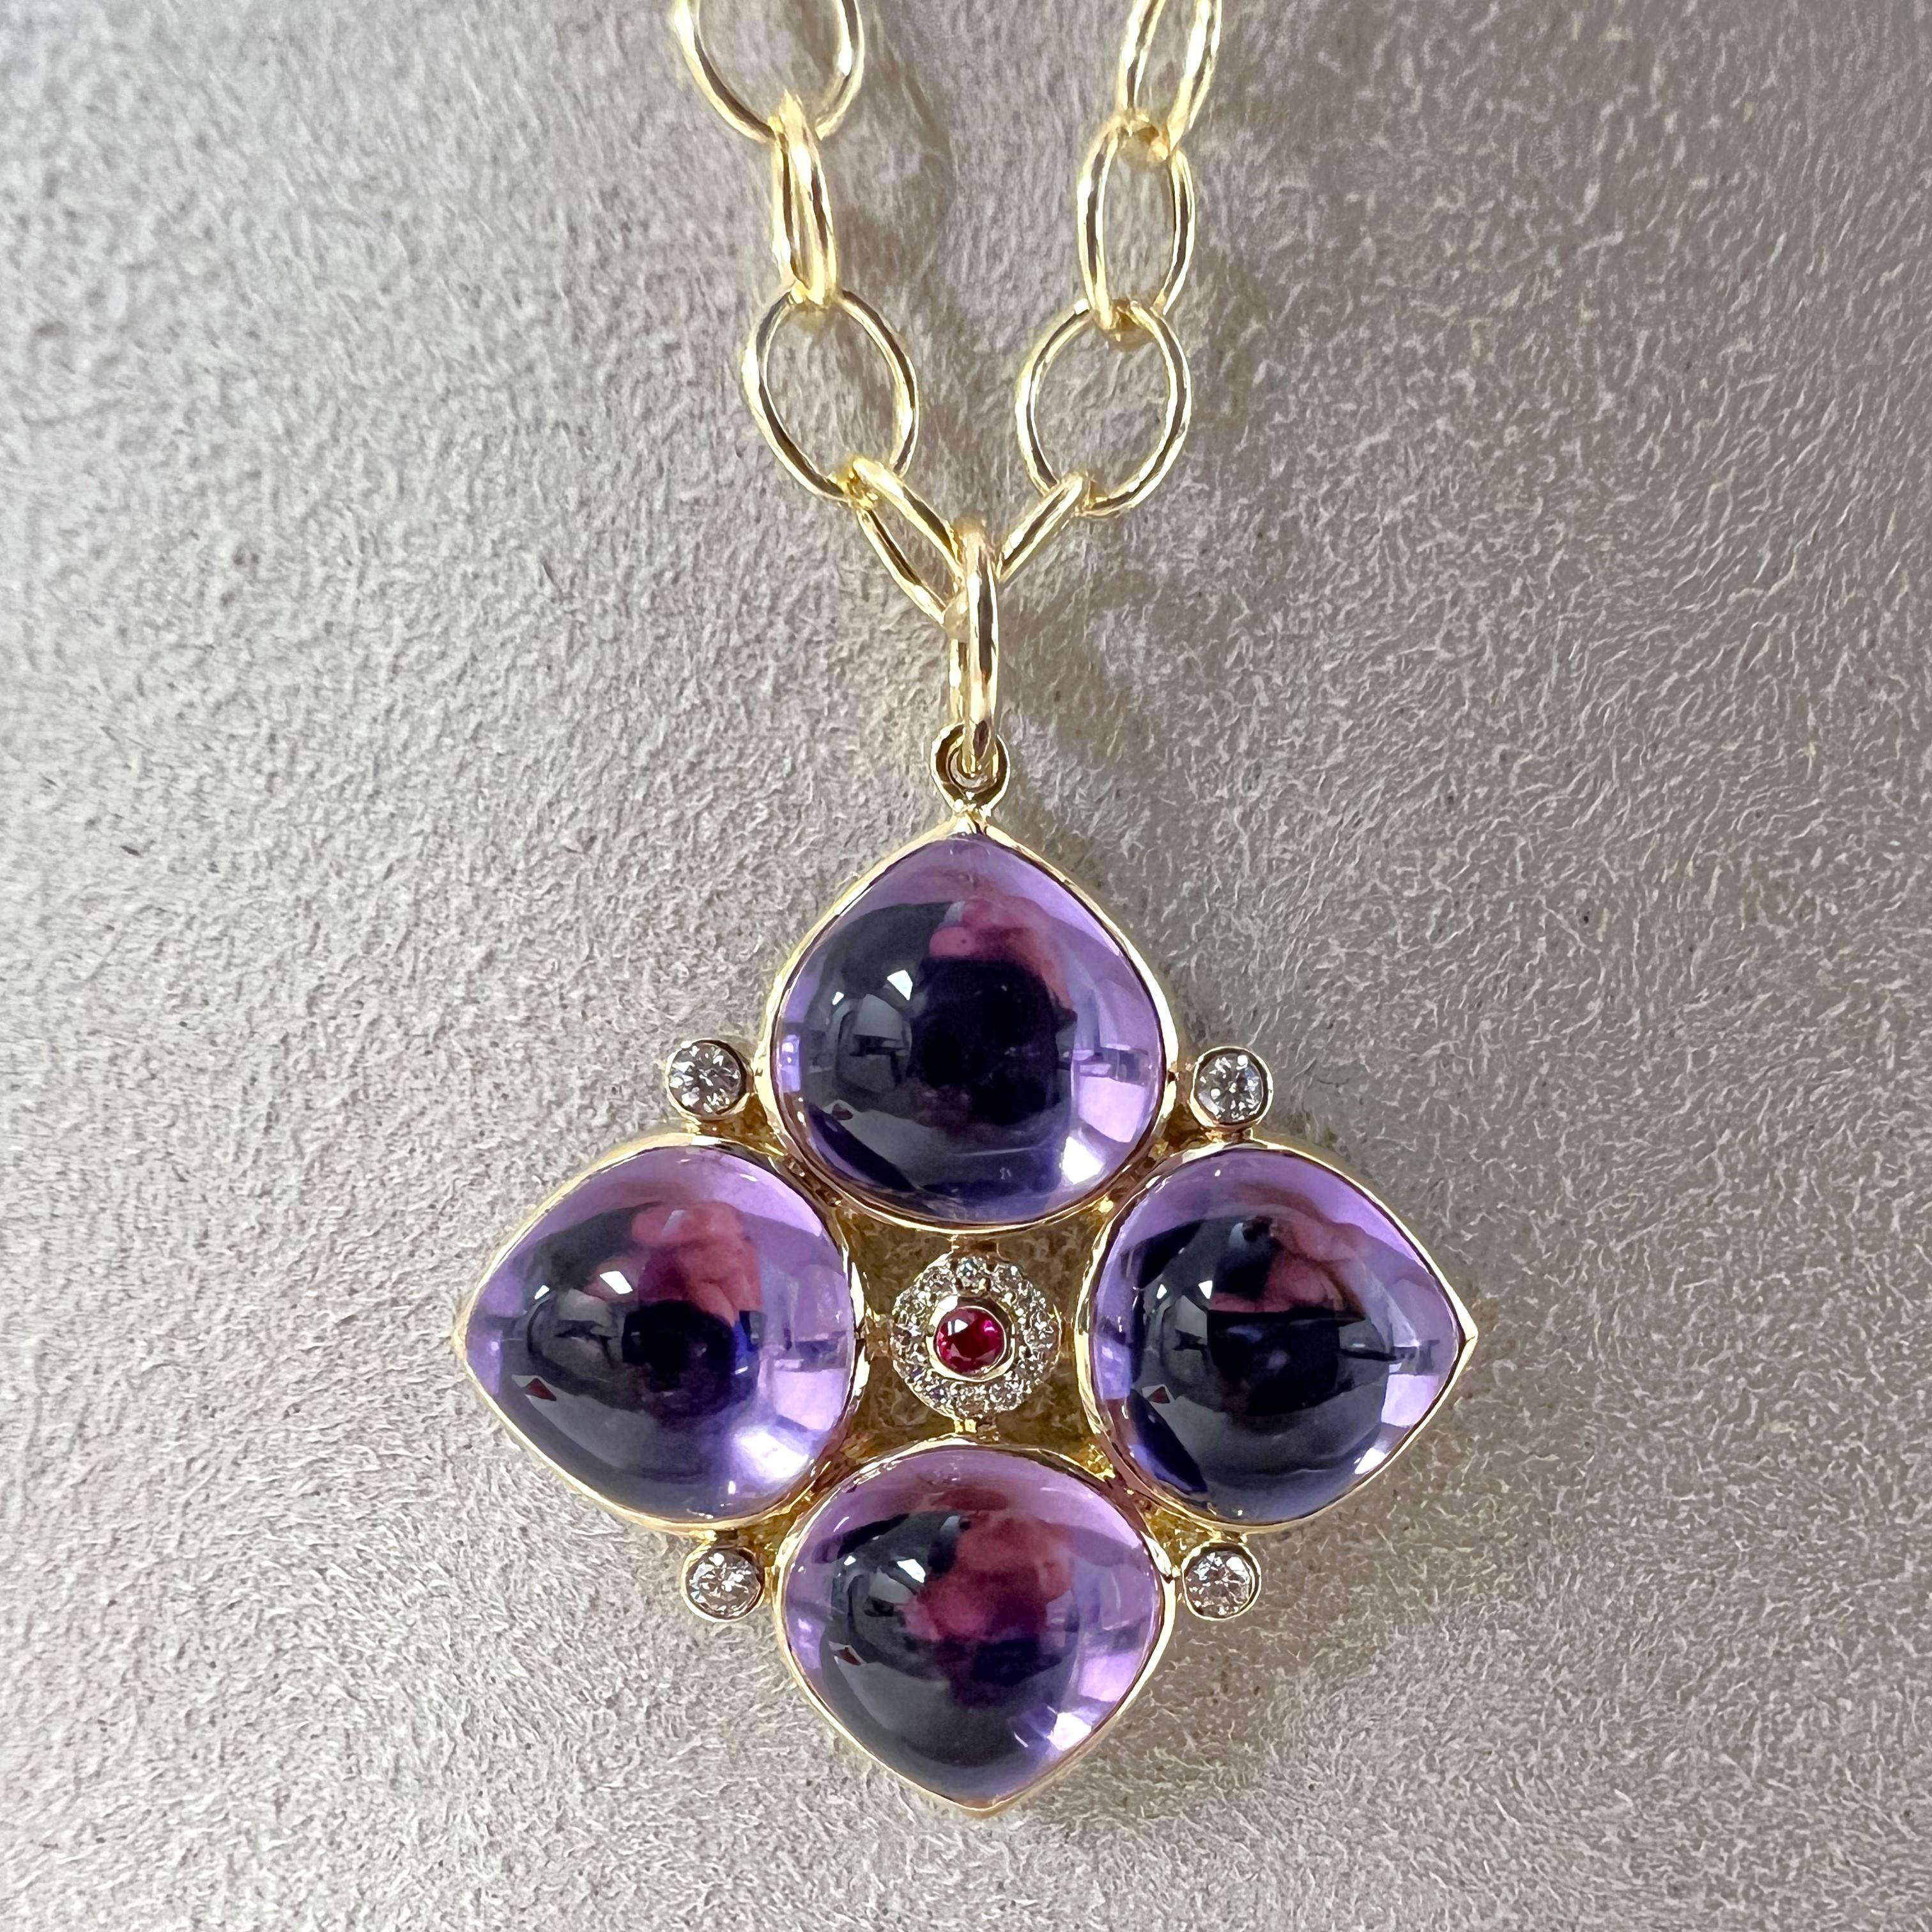 Created in 18 karat yellow gold
Amethyst 23 carats approx.
Ruby 0.05 carat approx.
Diamonds 0.20 carat approx.
Chain sold separately 
Limited edition

Crafted from 18k yellow gold and adorned with 23 carats of Amethyst, a 0.05 carat Ruby, and 0.20